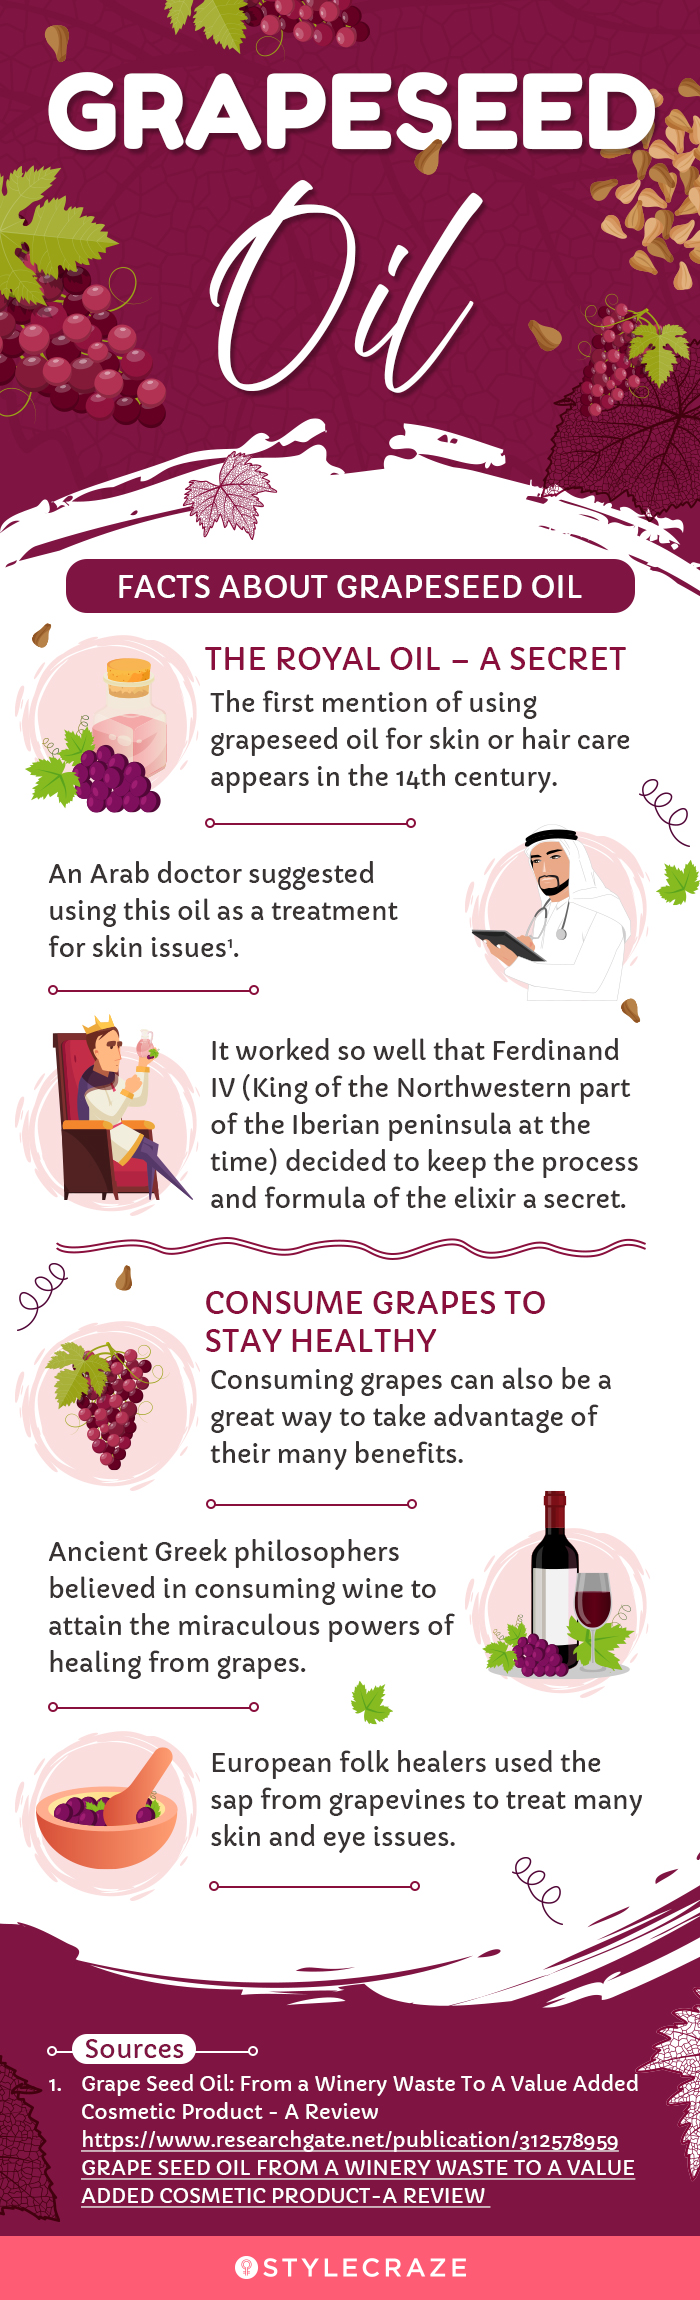 facts about grapeseed oil [infographic]